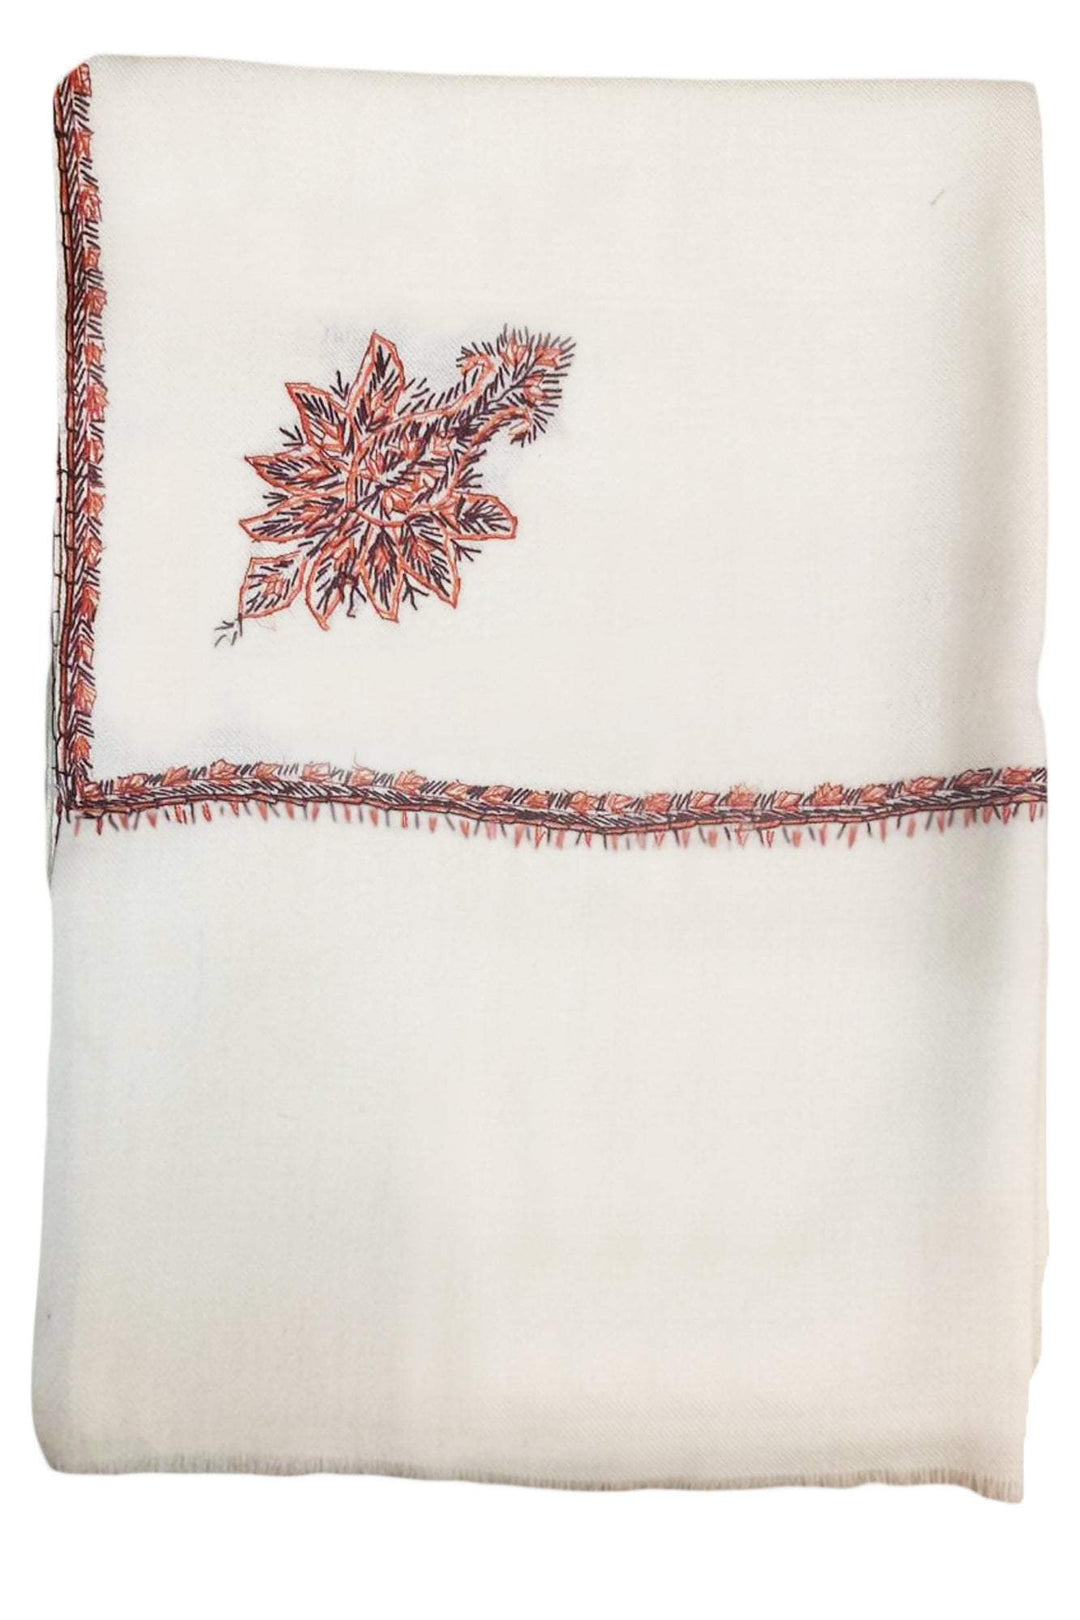 Pashtush Mens Embroidery Shawl, Gents Thick Wool Shawls, 100% Handmade Embroidery, Ivory